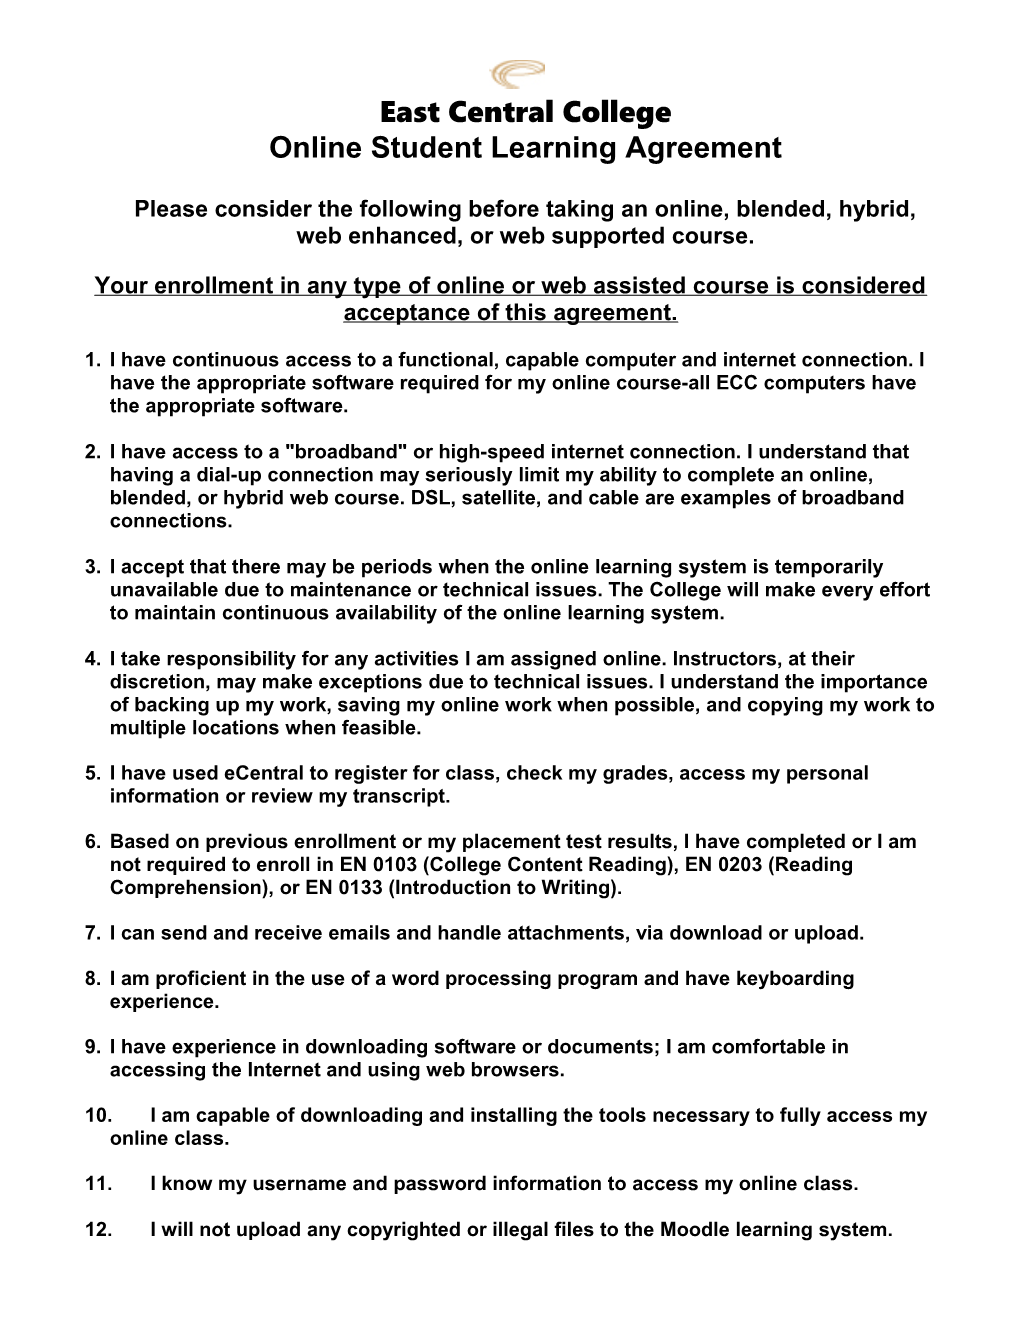 East Central College Online Student Learning Agreement Please Consider the Followingbefore